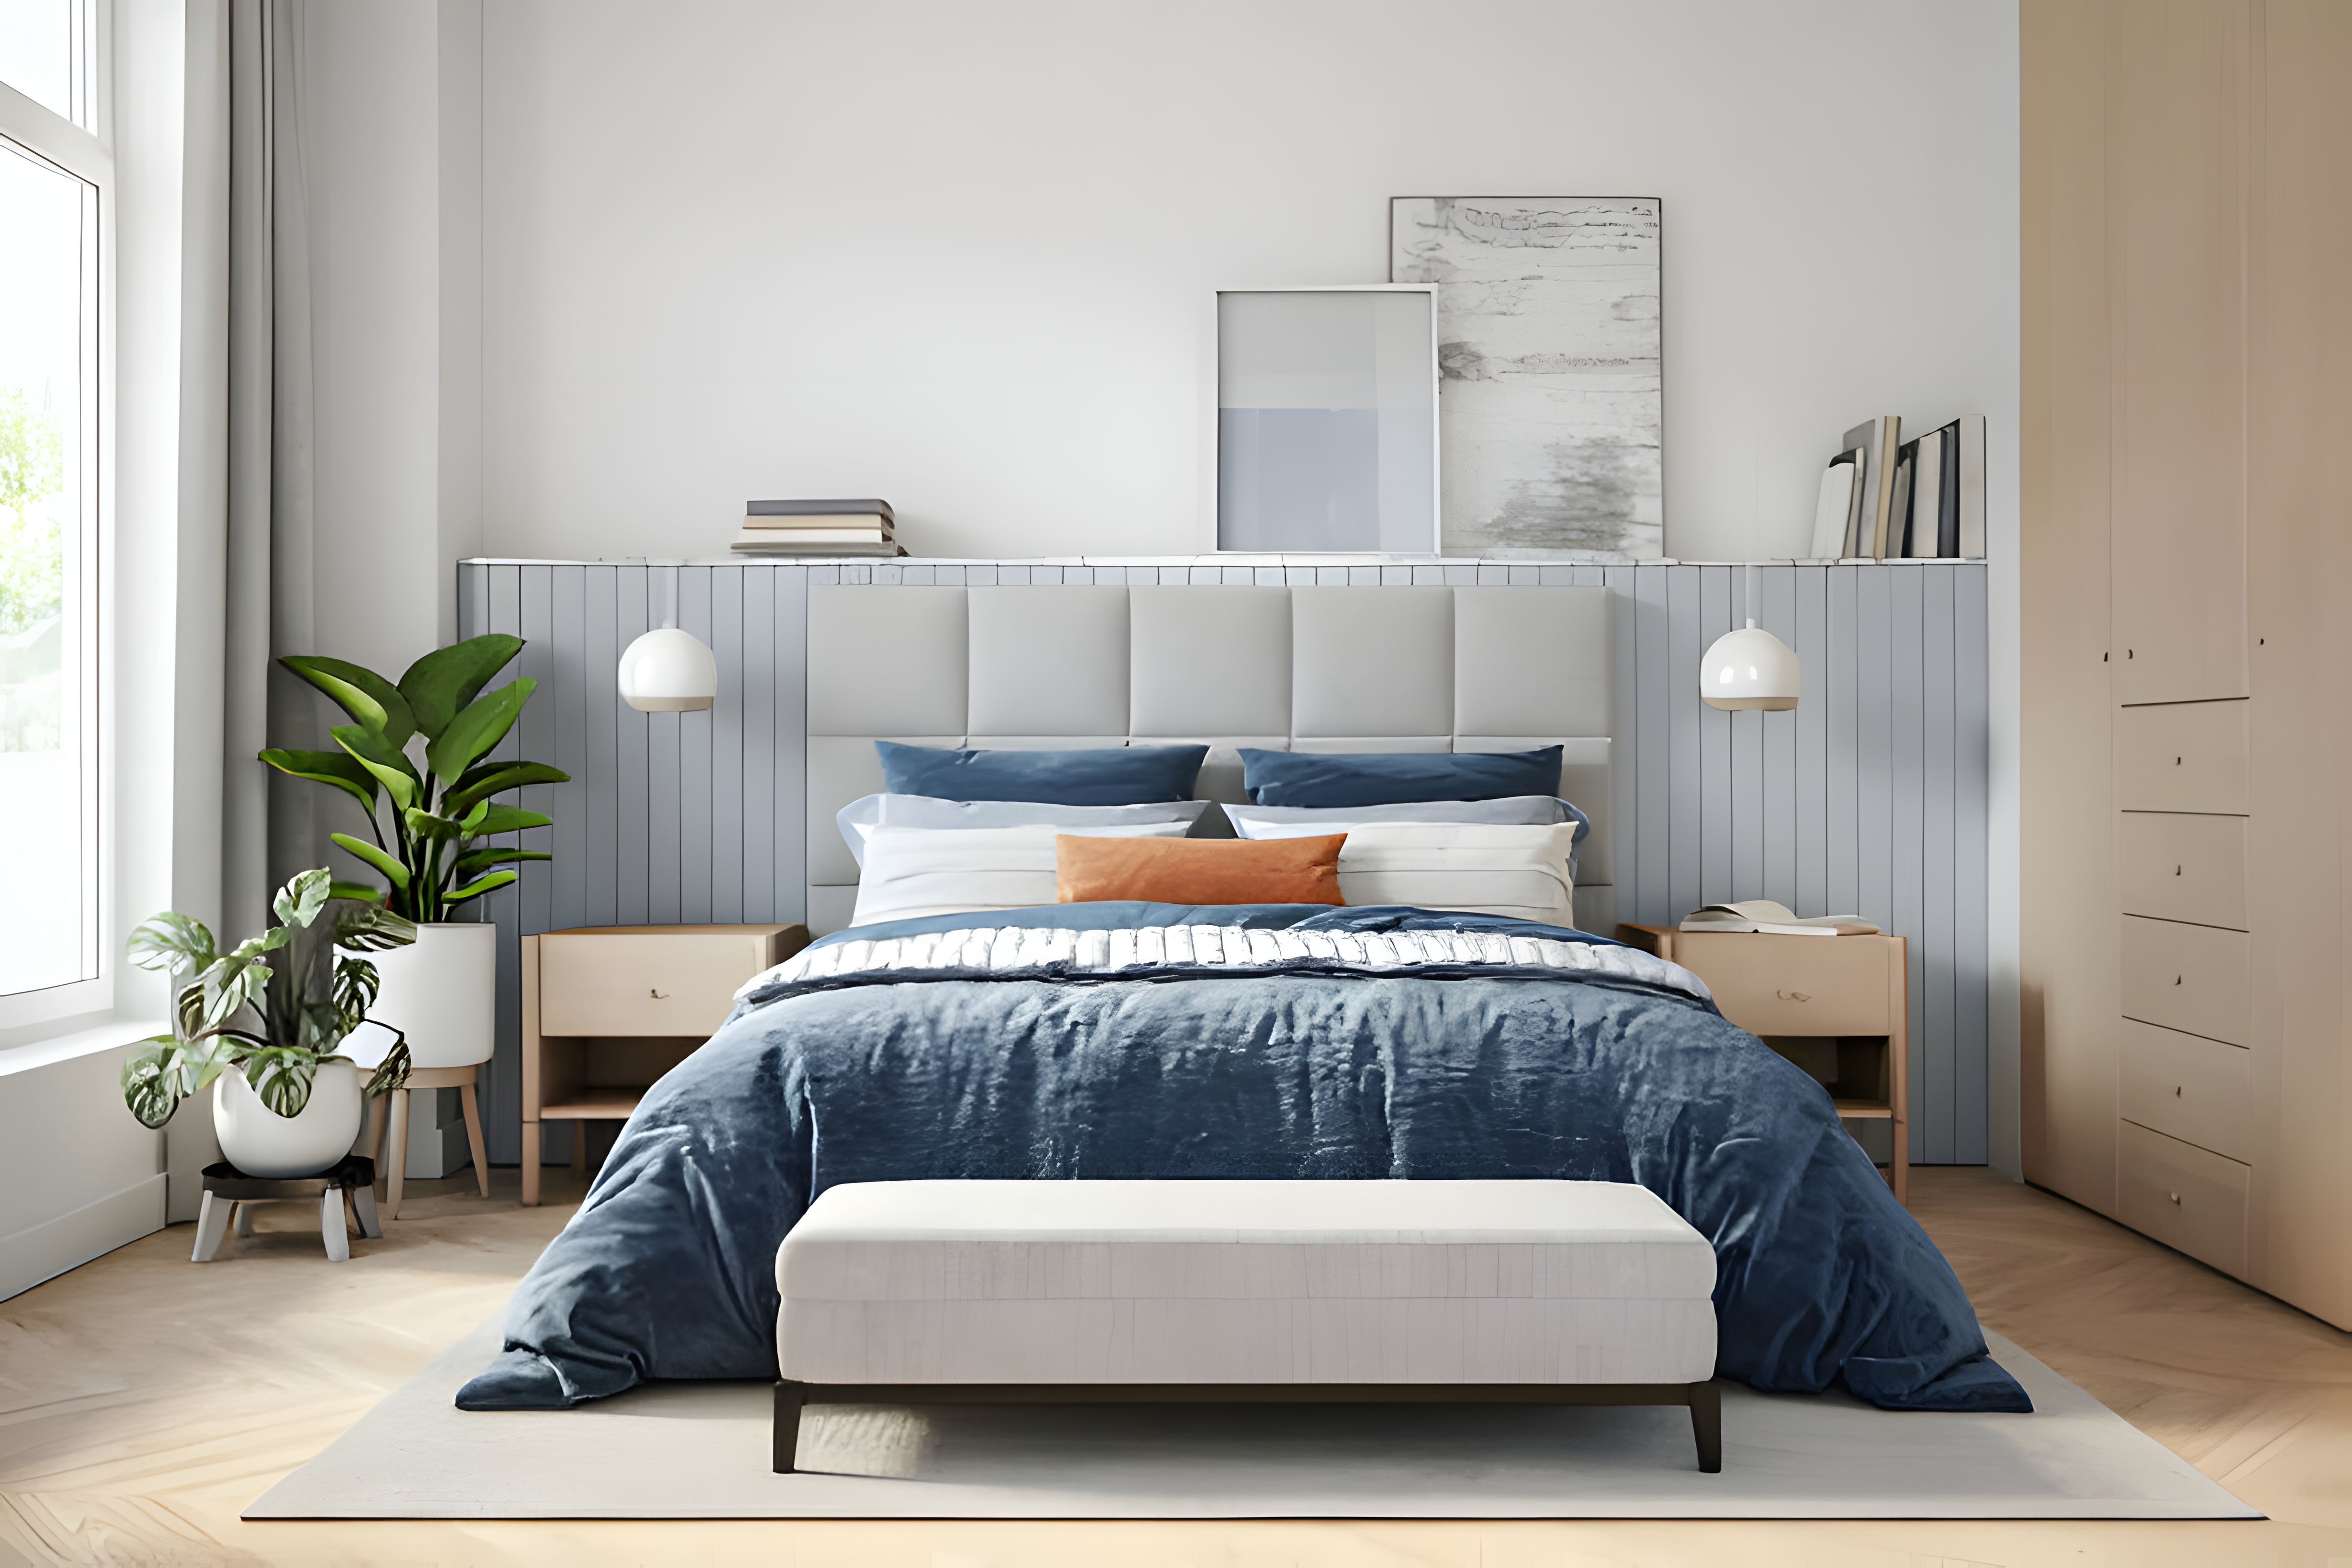 Transform your Space with Right Bedding Options by Vista Furnishing